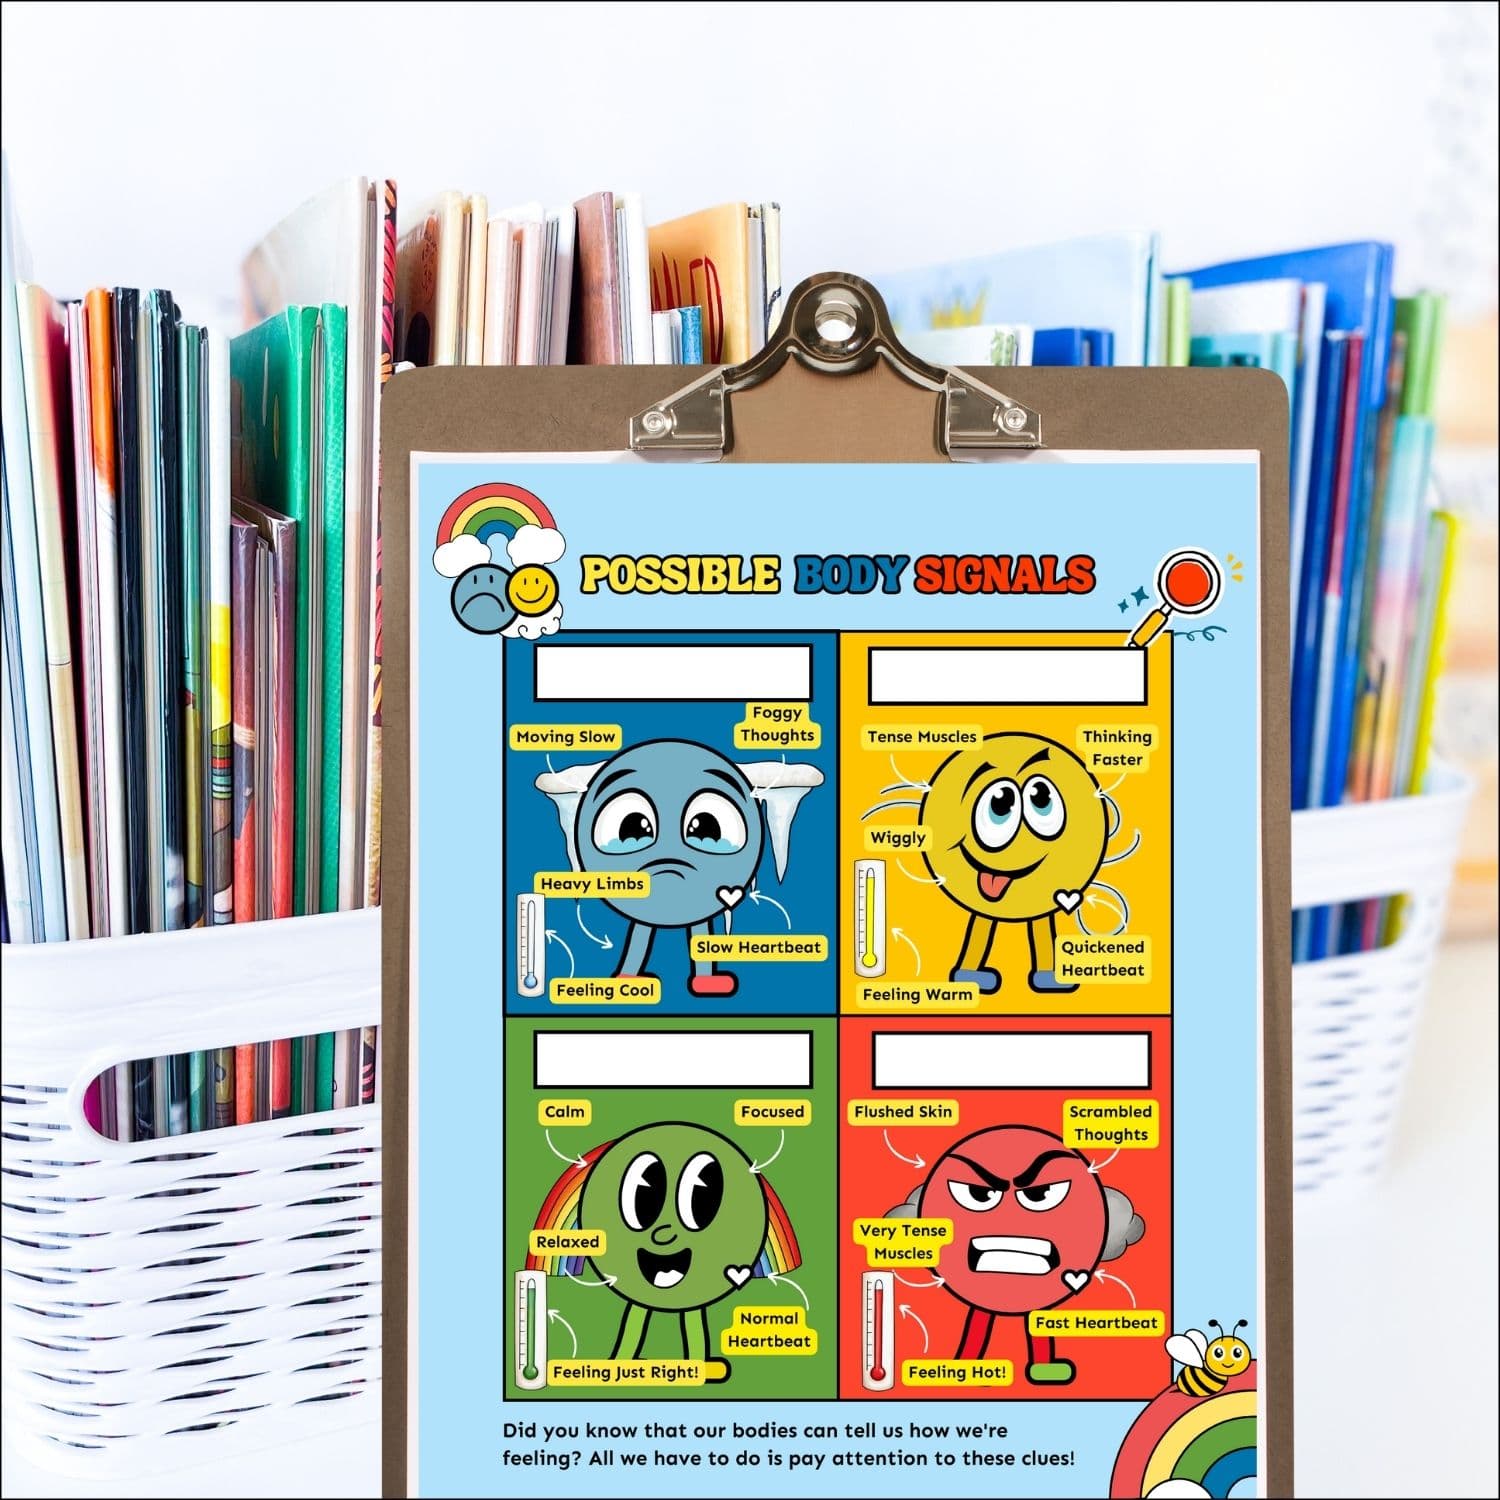 Emotion Zones Regulation Station Activities (ages 3 to 10)